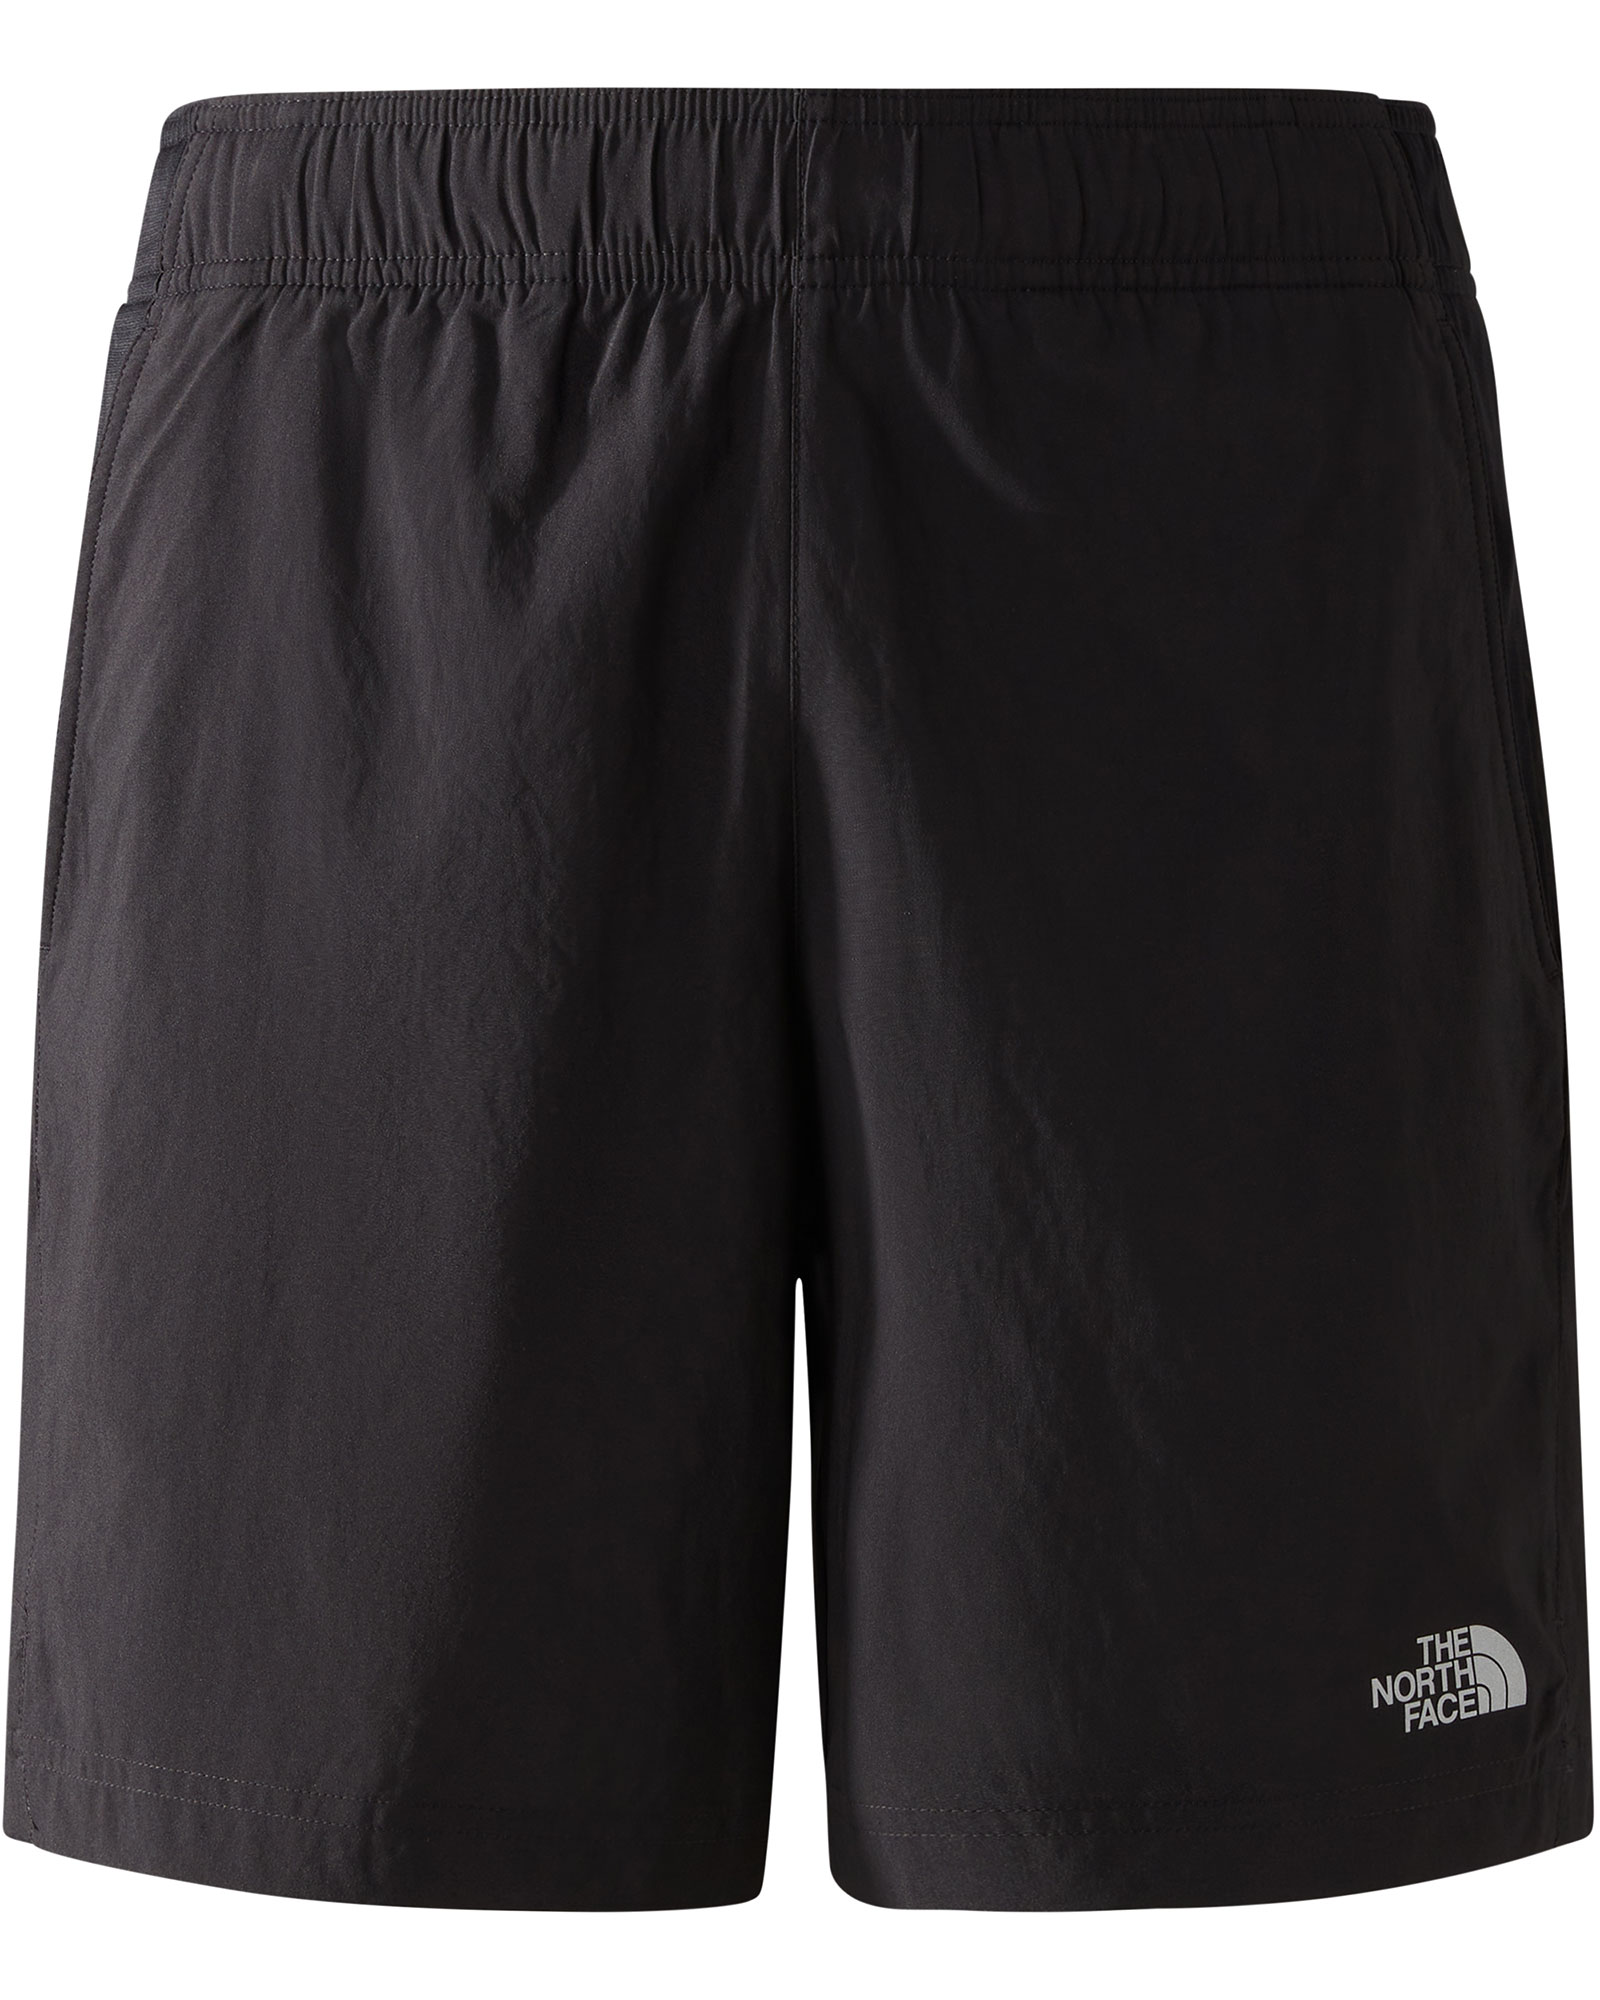 The North Face 24/7 Men's Shorts 0